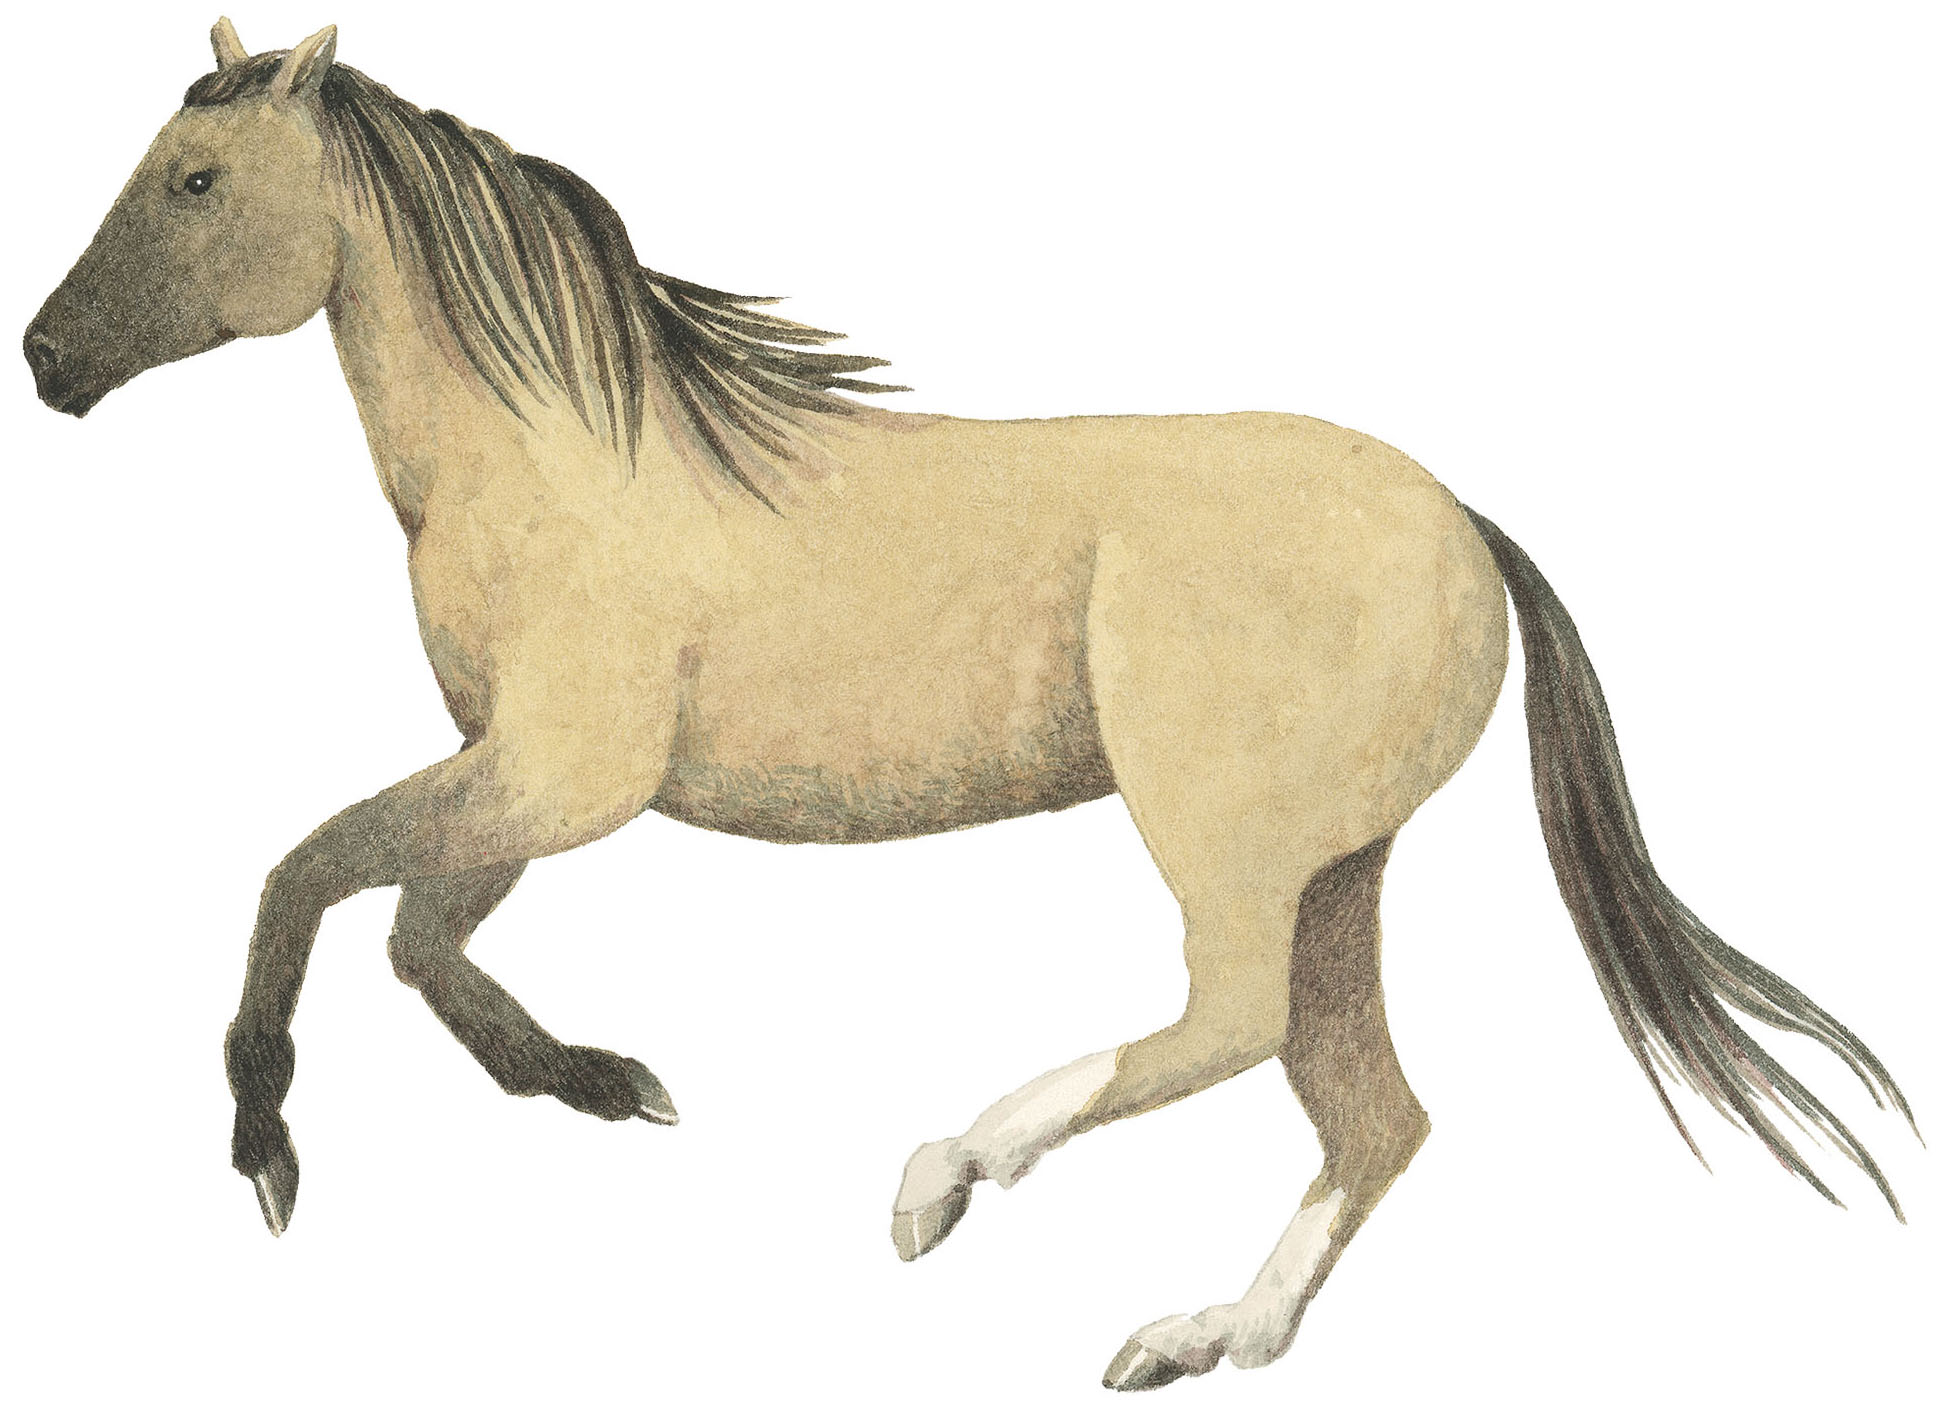 A tan and gray horse illustration